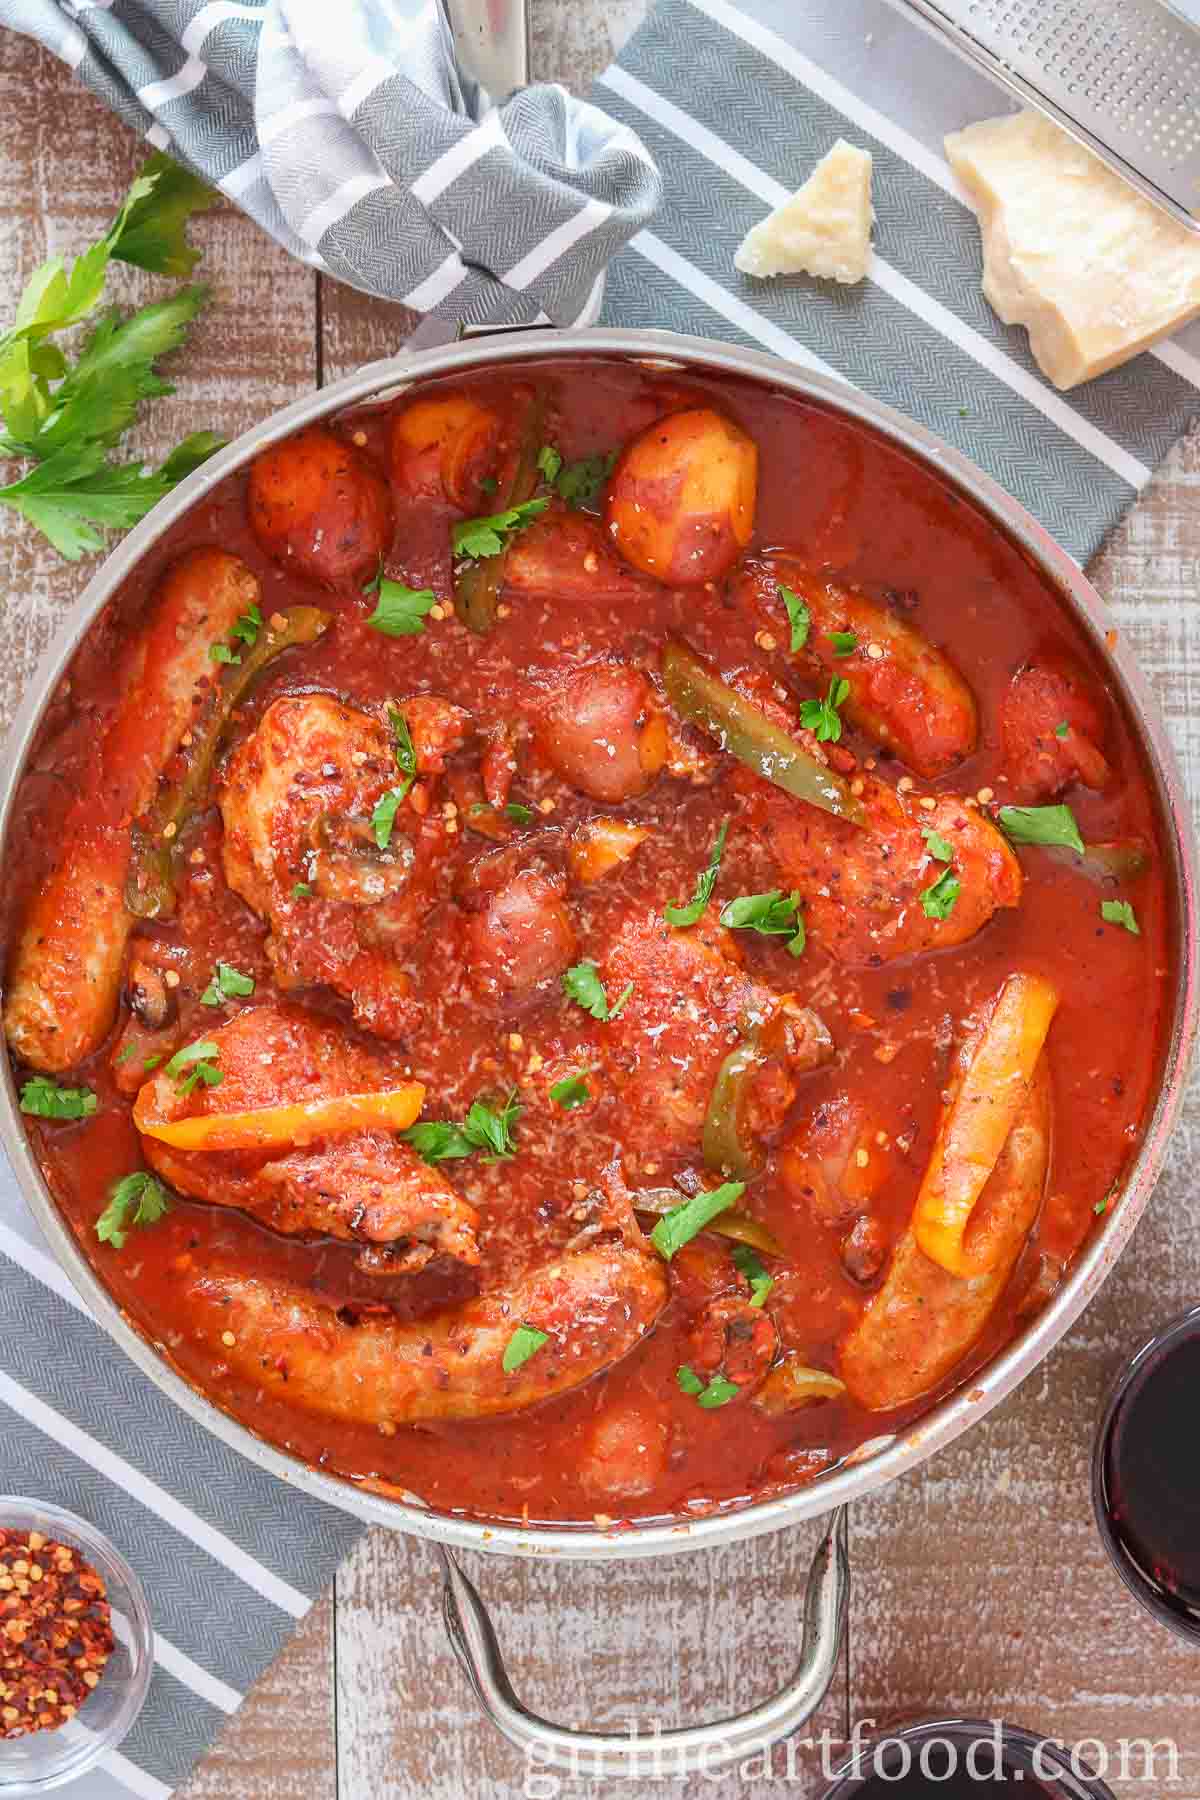 Pan of chicken, sausage, peppers and potatoes in tomato sauce.